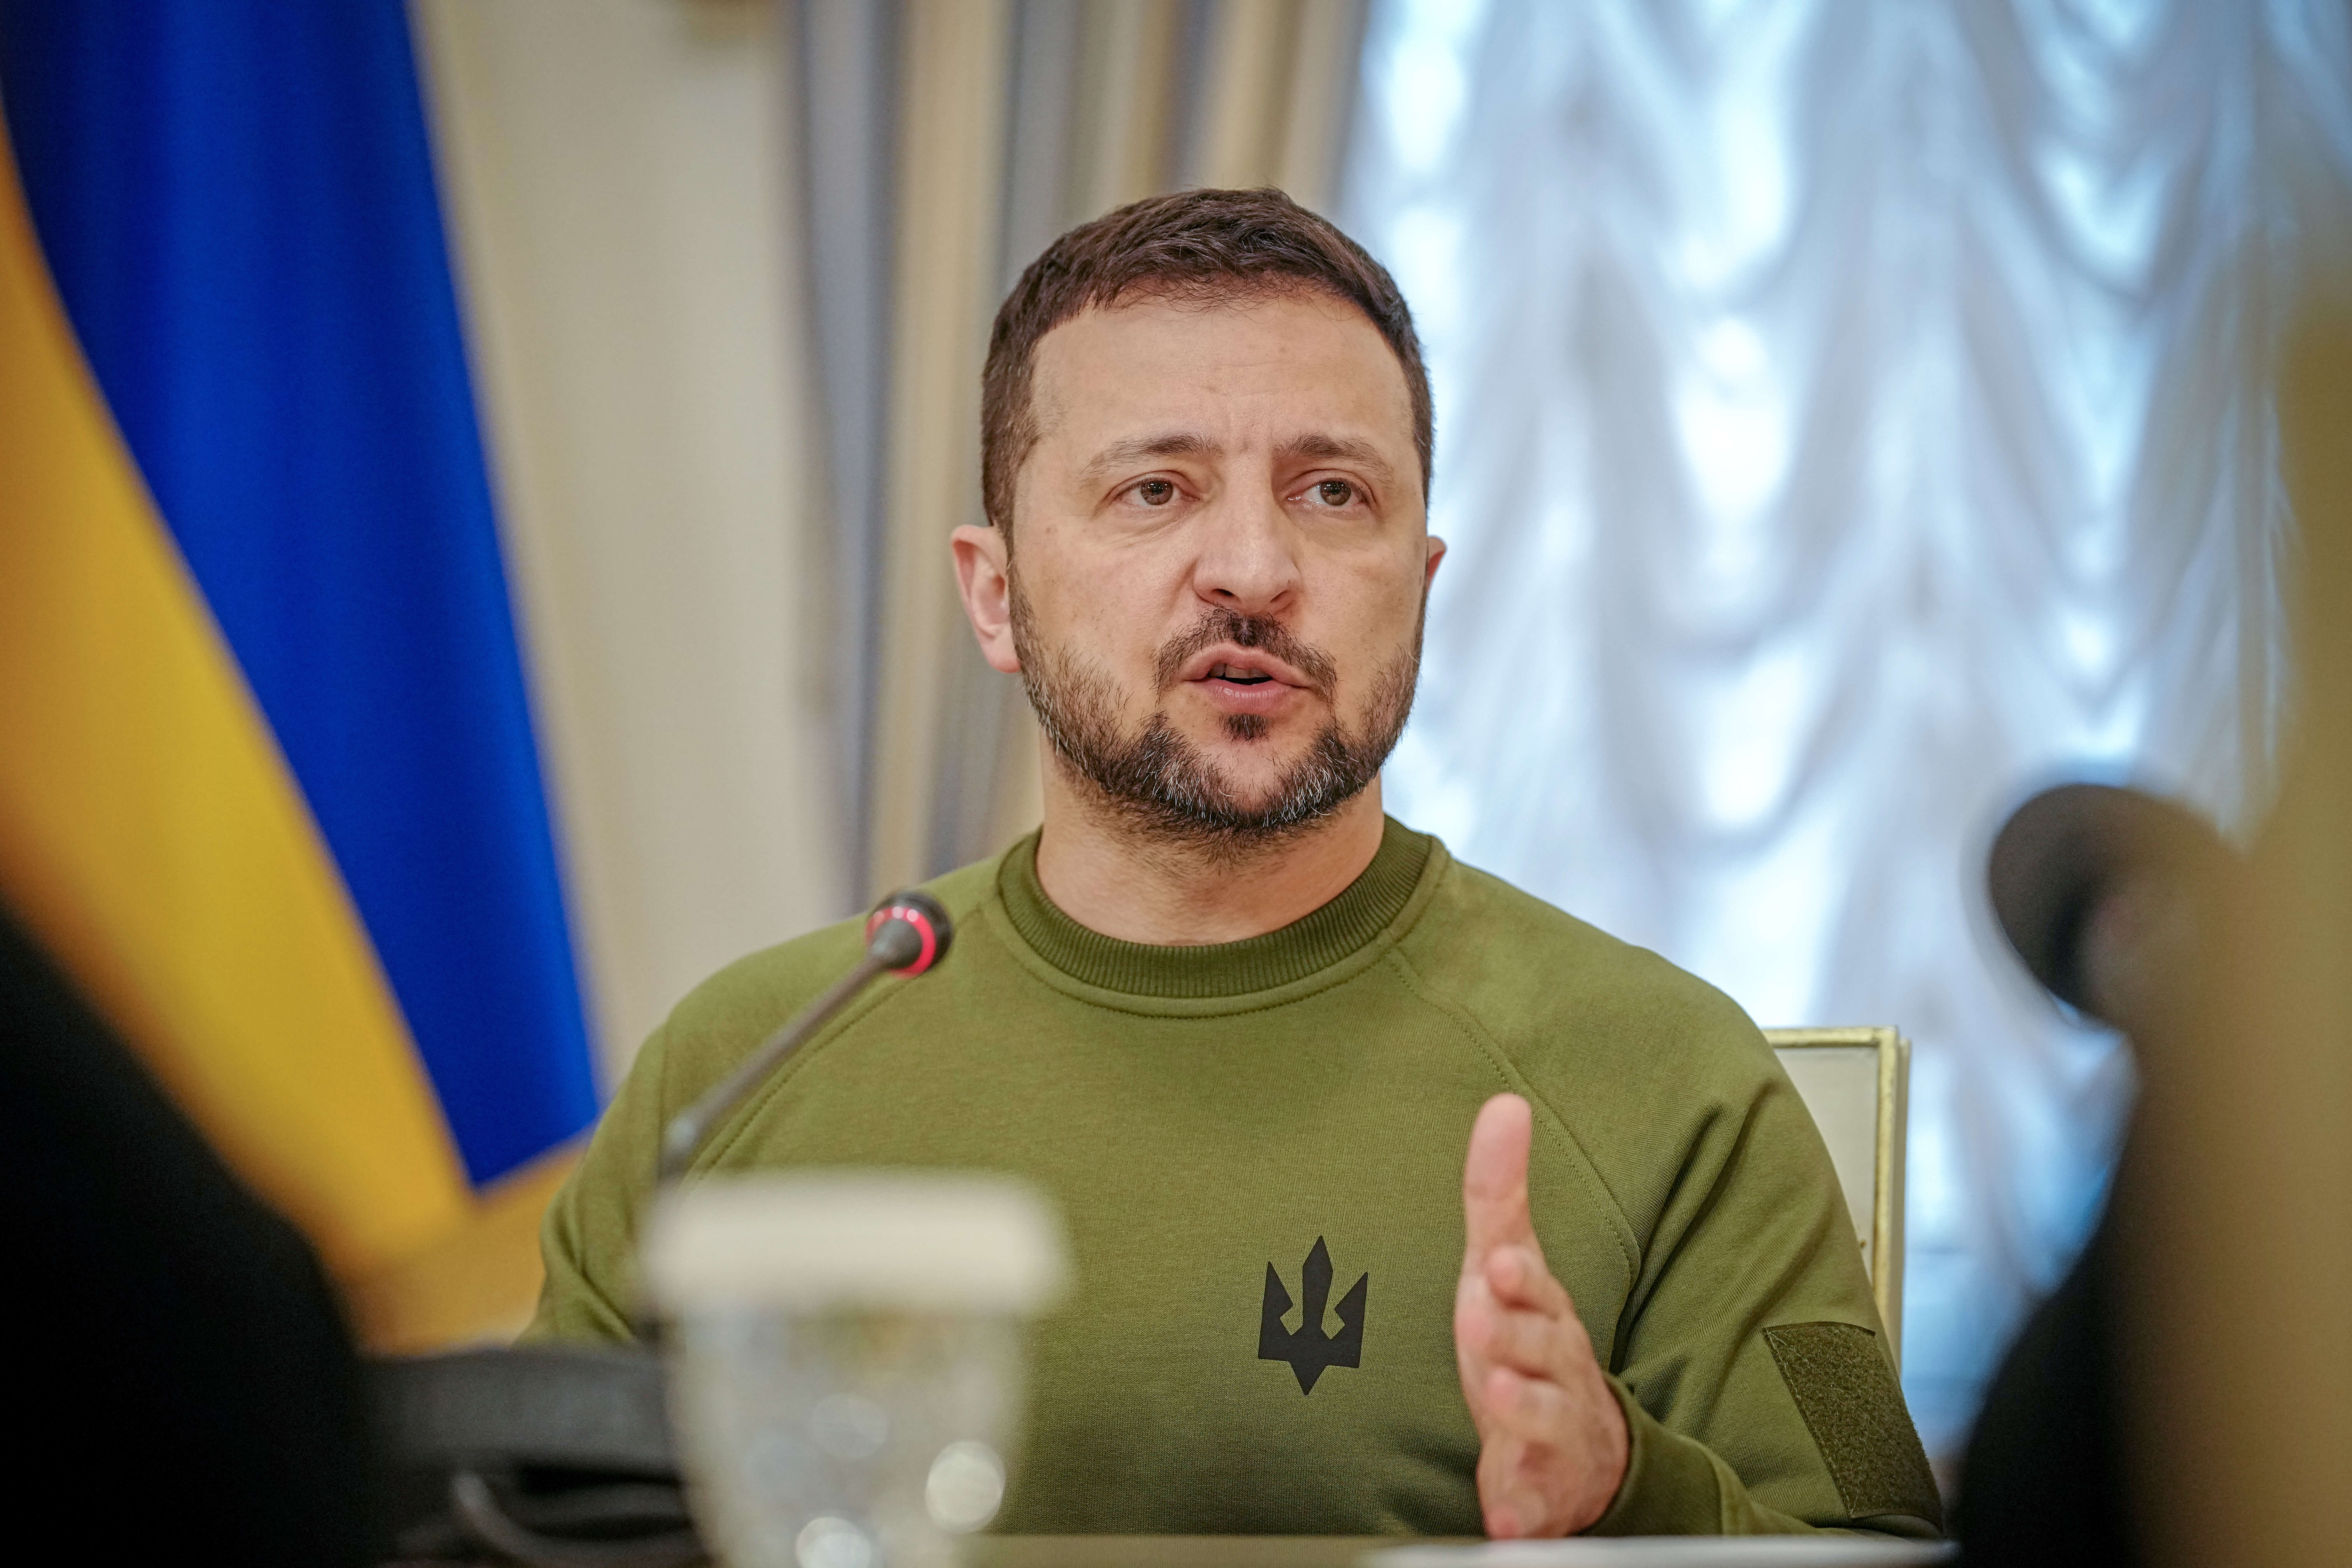 How To Bet - Ukrainian Military Banned from Gambling as Regulations Intensify